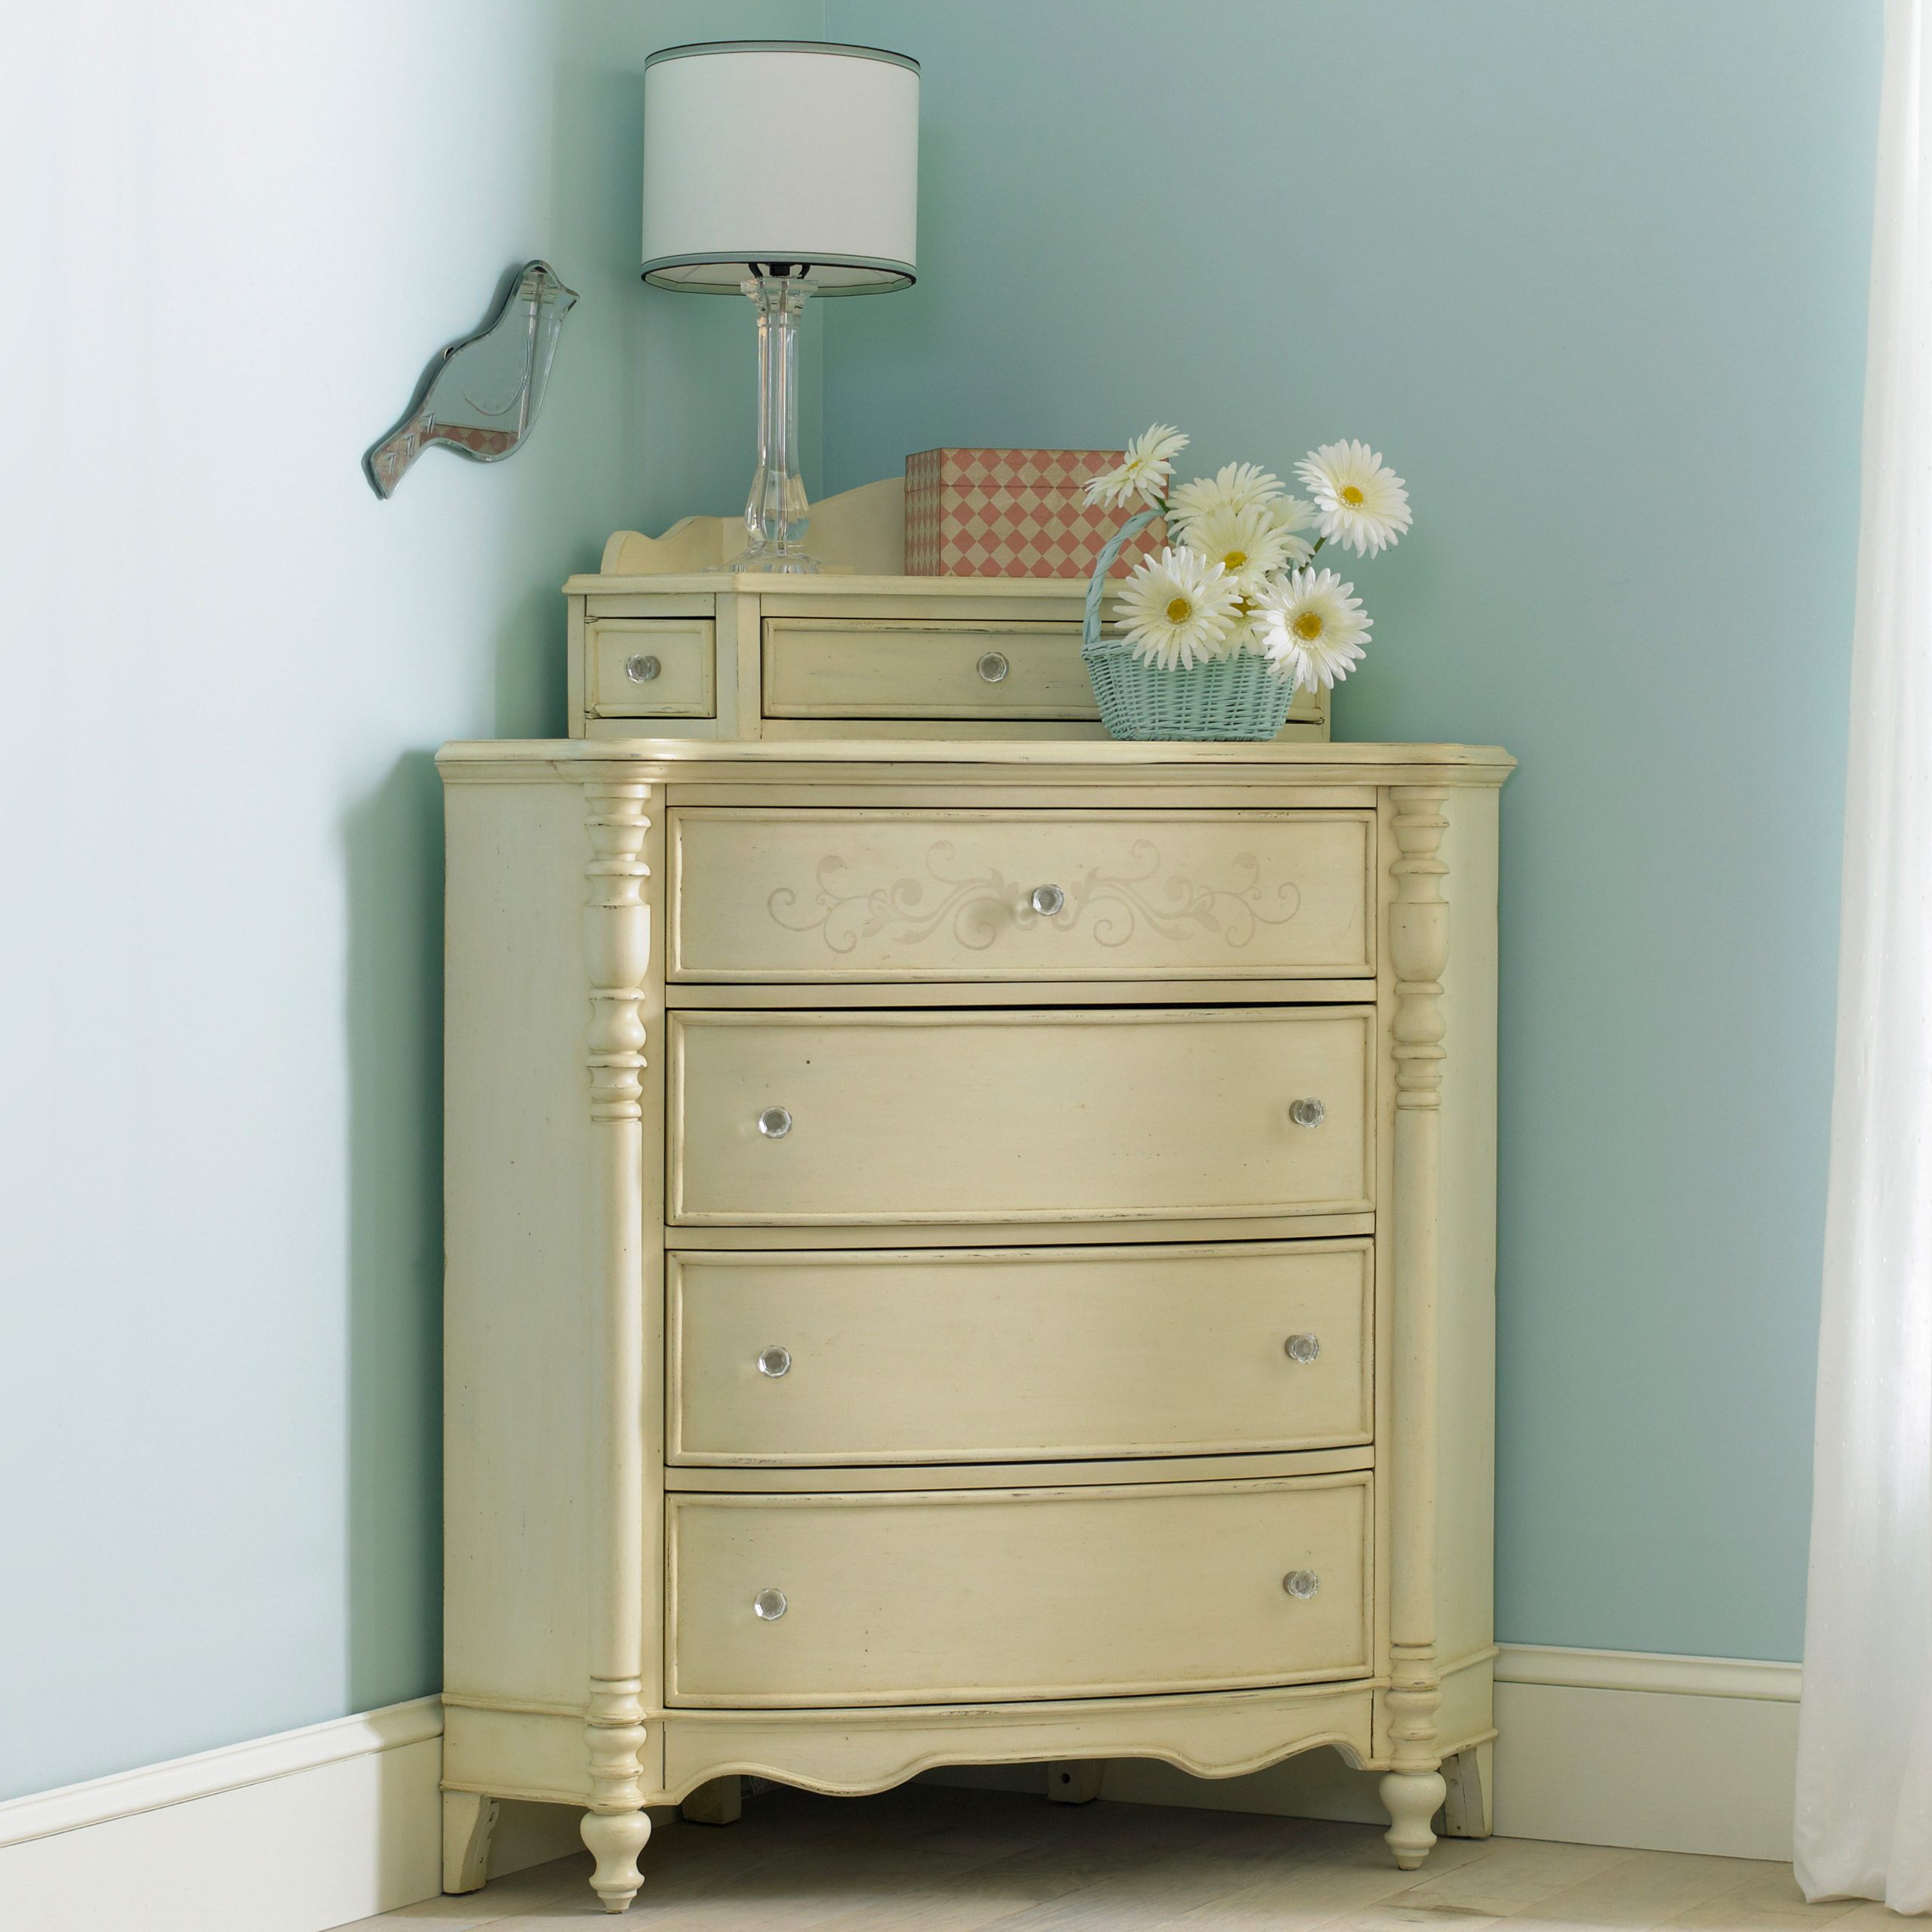 Ava corner chest traditional dressers chests and bedroom armoires